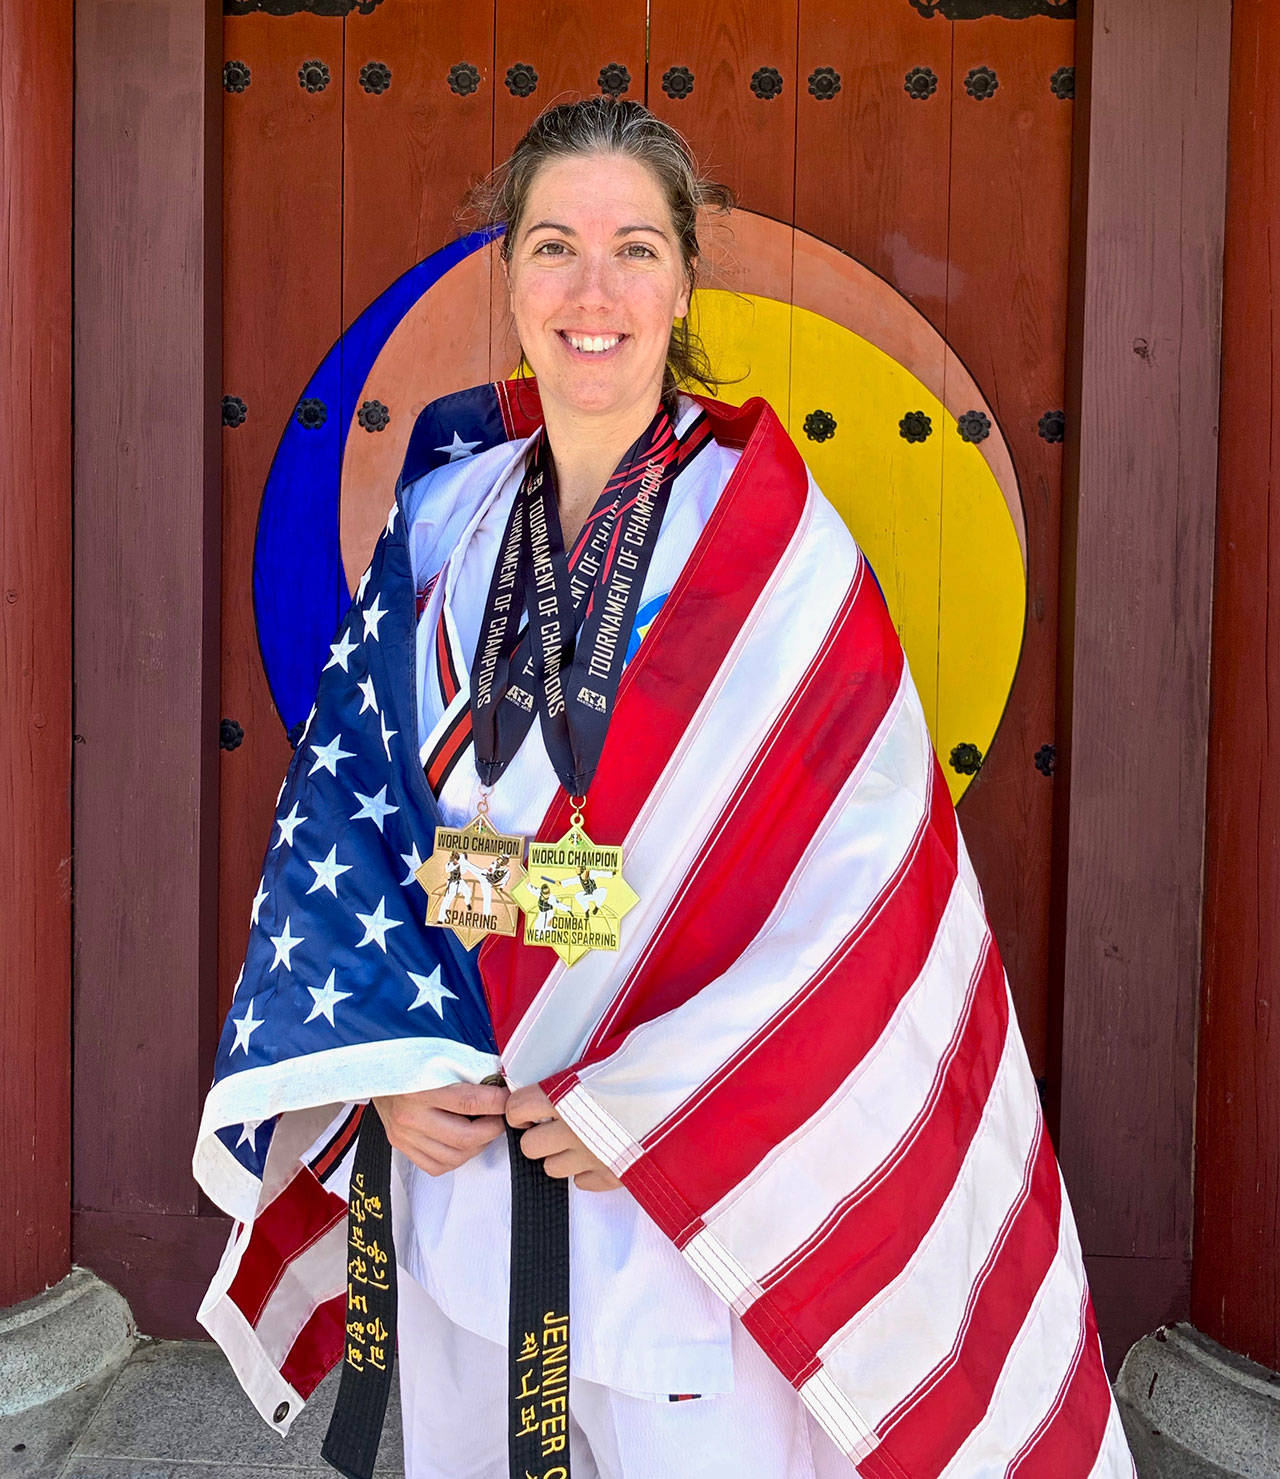 Jenny Cisney finished first in combat sparring at the ATA world championships last week. (submitted photo)